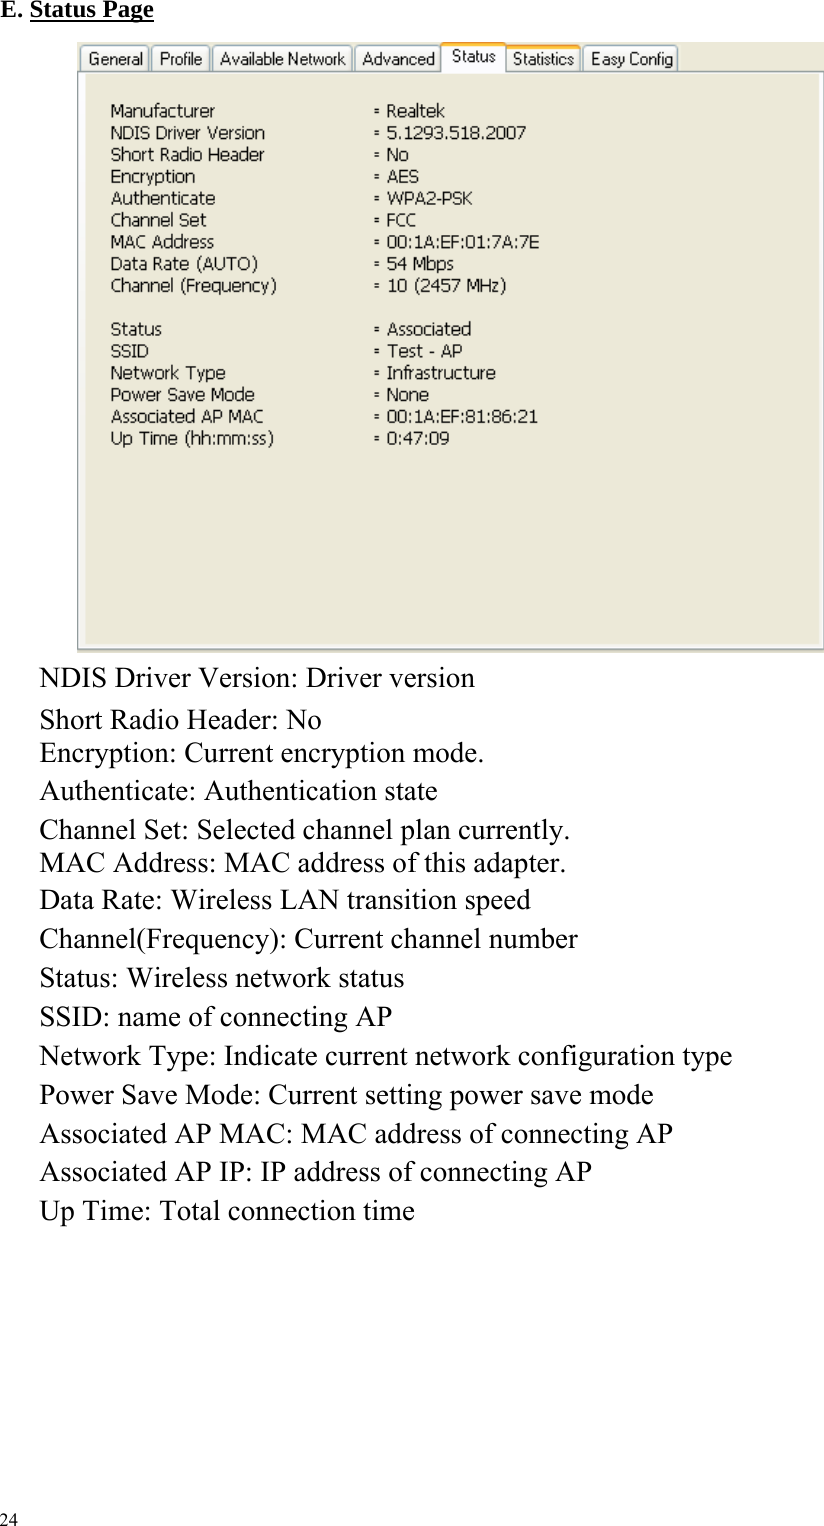  E. Status Page                            NDIS Driver Version: Driver version Short Radio Header: No Encryption: Current encryption mode.     Authenticate: Authentication state   Channel Set: Selected channel plan currently.     MAC Address: MAC address of this adapter.     Data Rate: Wireless LAN transition speed Channel(Frequency): Current channel number     Status: Wireless network status     SSID: name of connecting AP Network Type: Indicate current network configuration type     Power Save Mode: Current setting power save mode     Associated AP MAC: MAC address of connecting AP Associated AP IP: IP address of connecting AP Up Time: Total connection time          24 